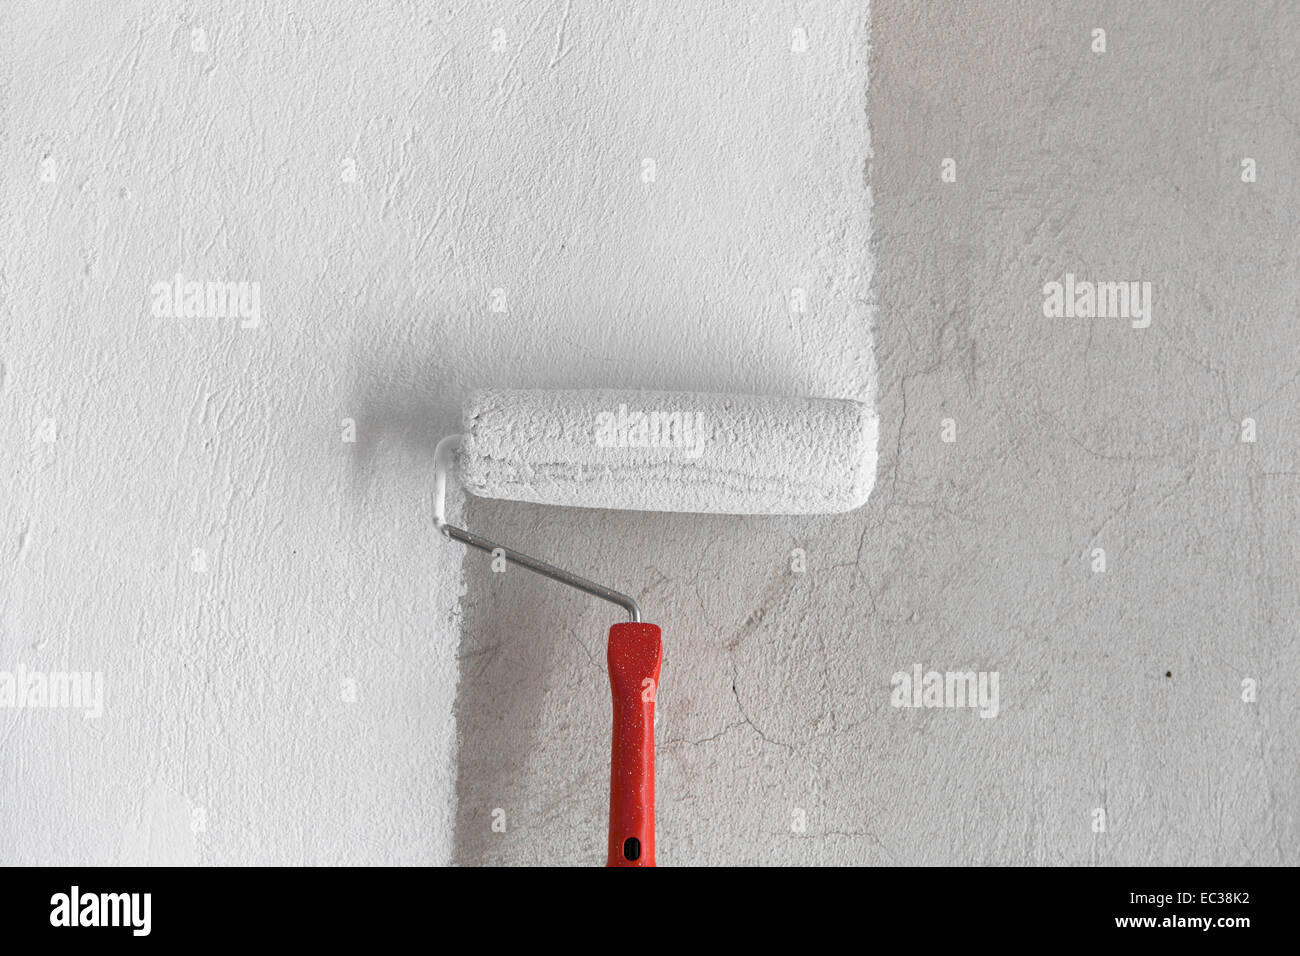 Painting a rough wall by painting roller. Stock Photo